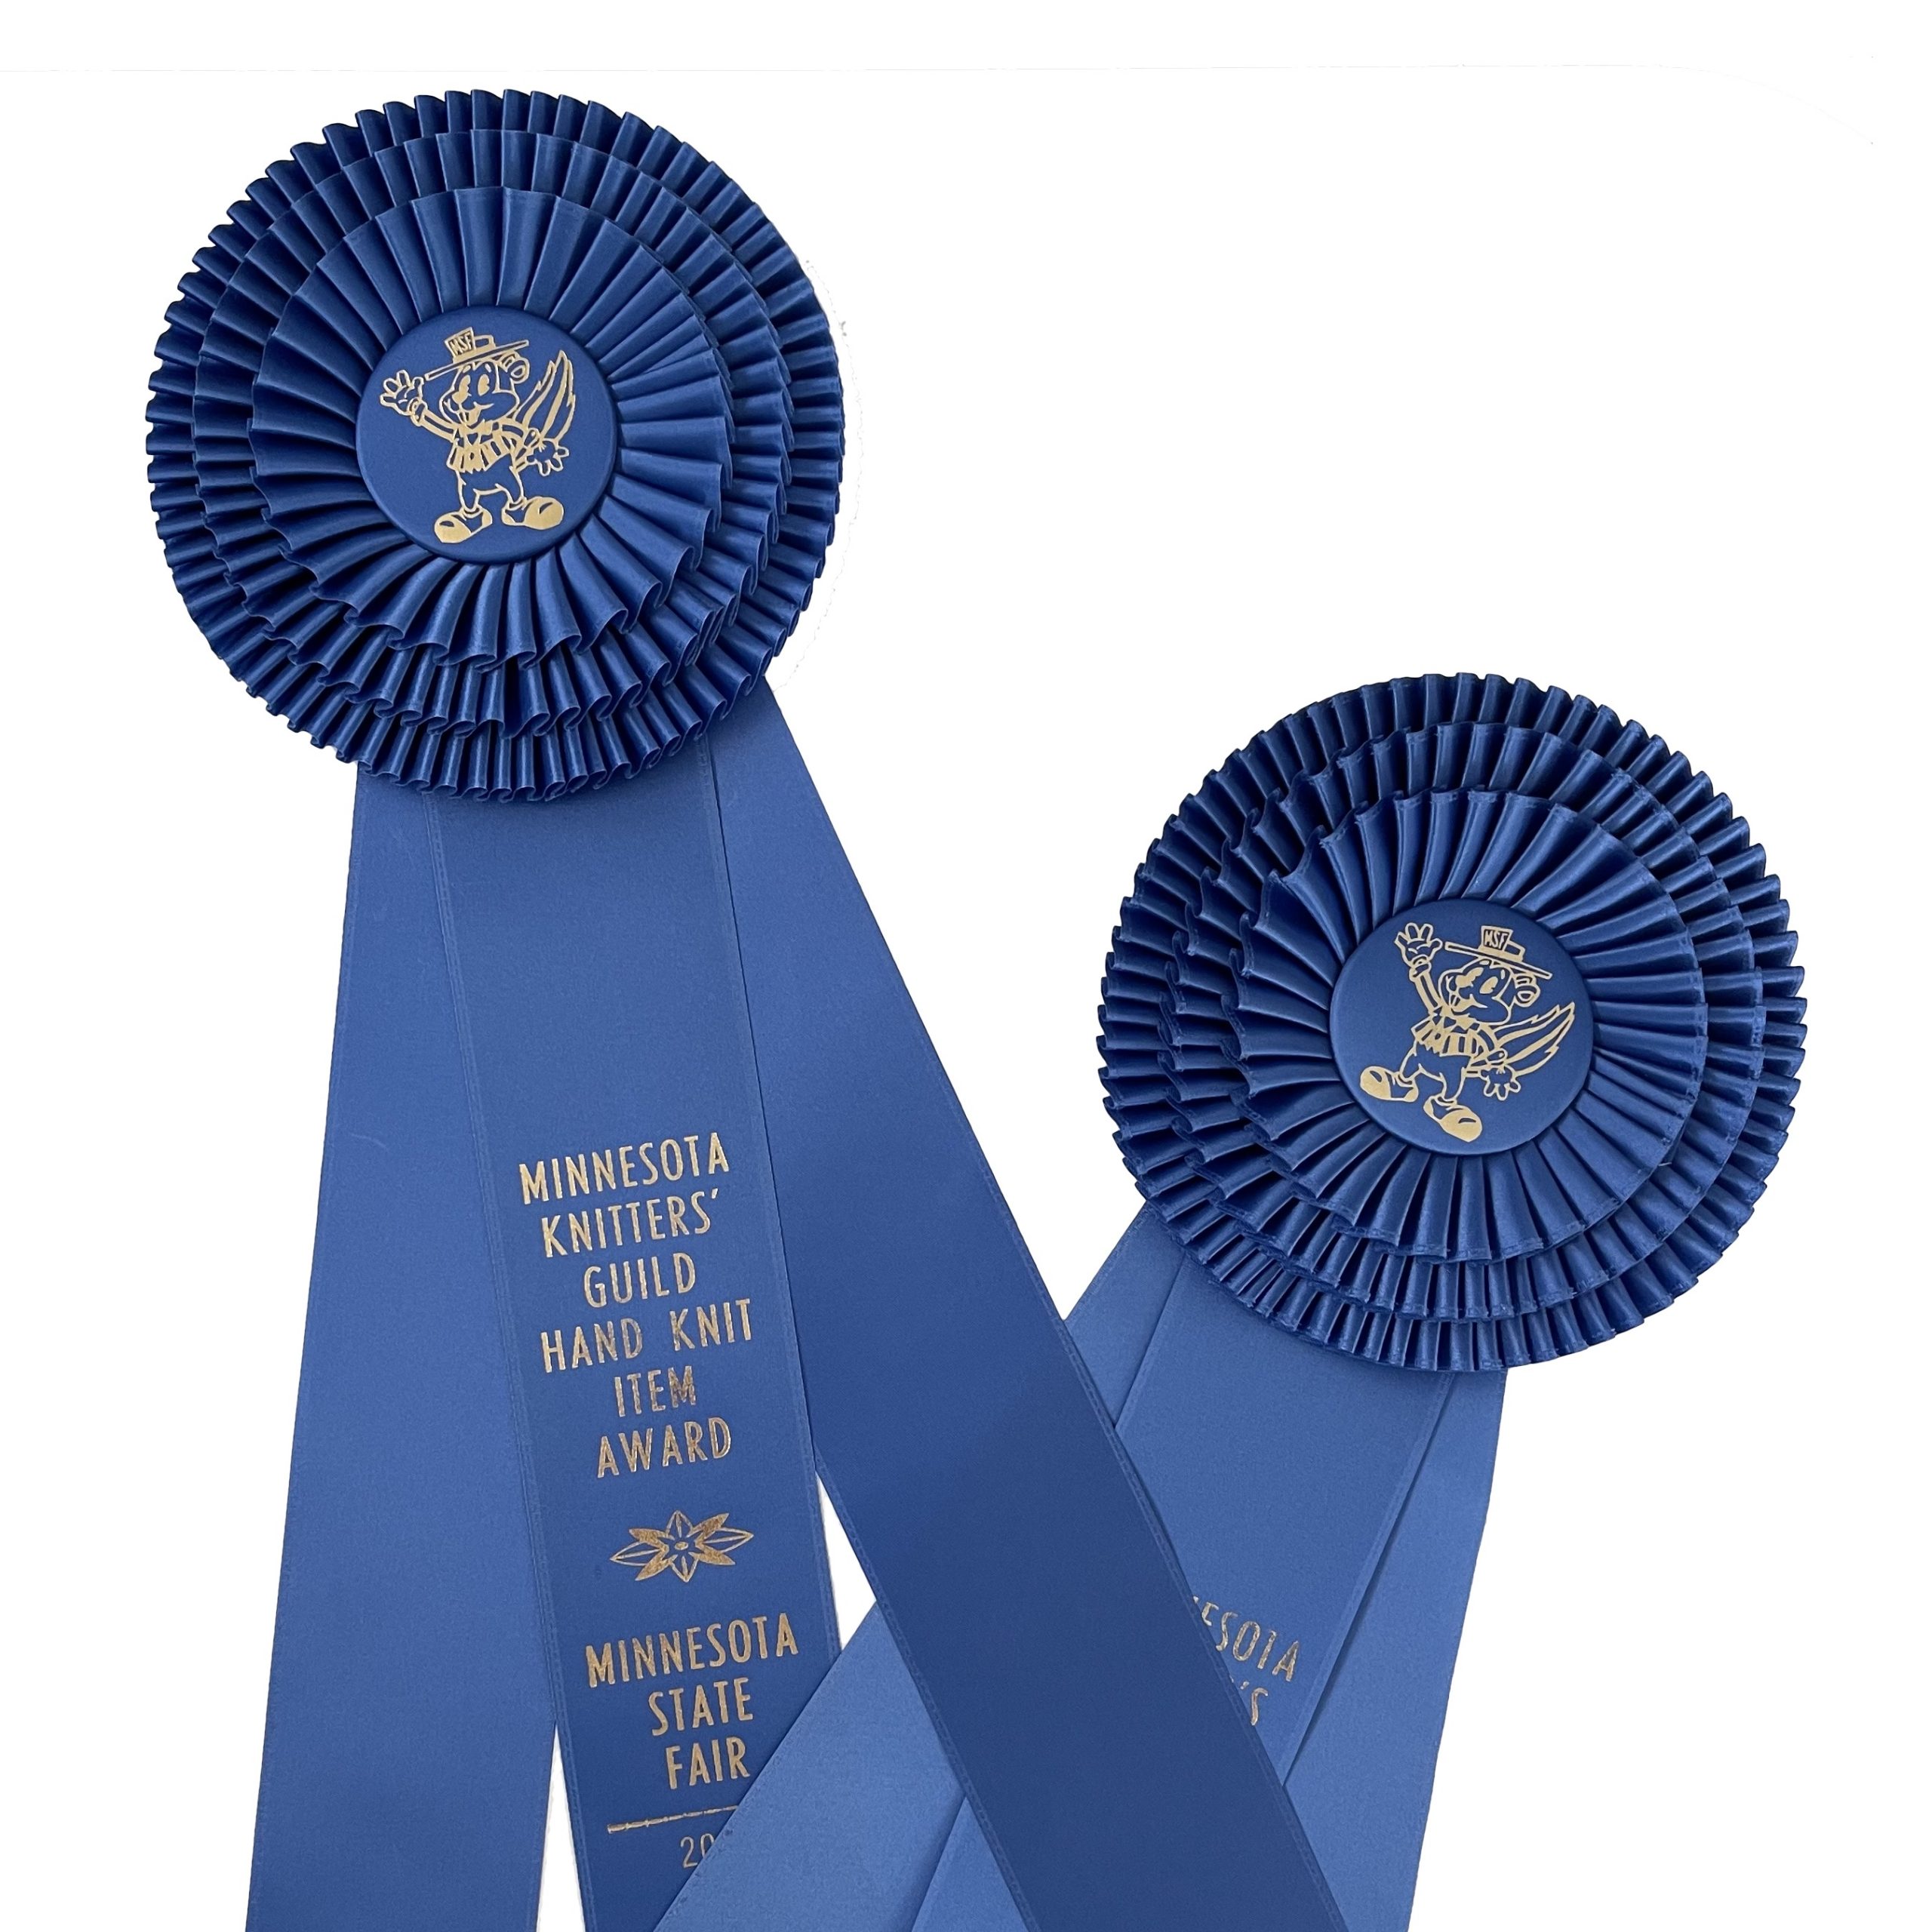 two blue rosette awards from the Minnesota State Fair